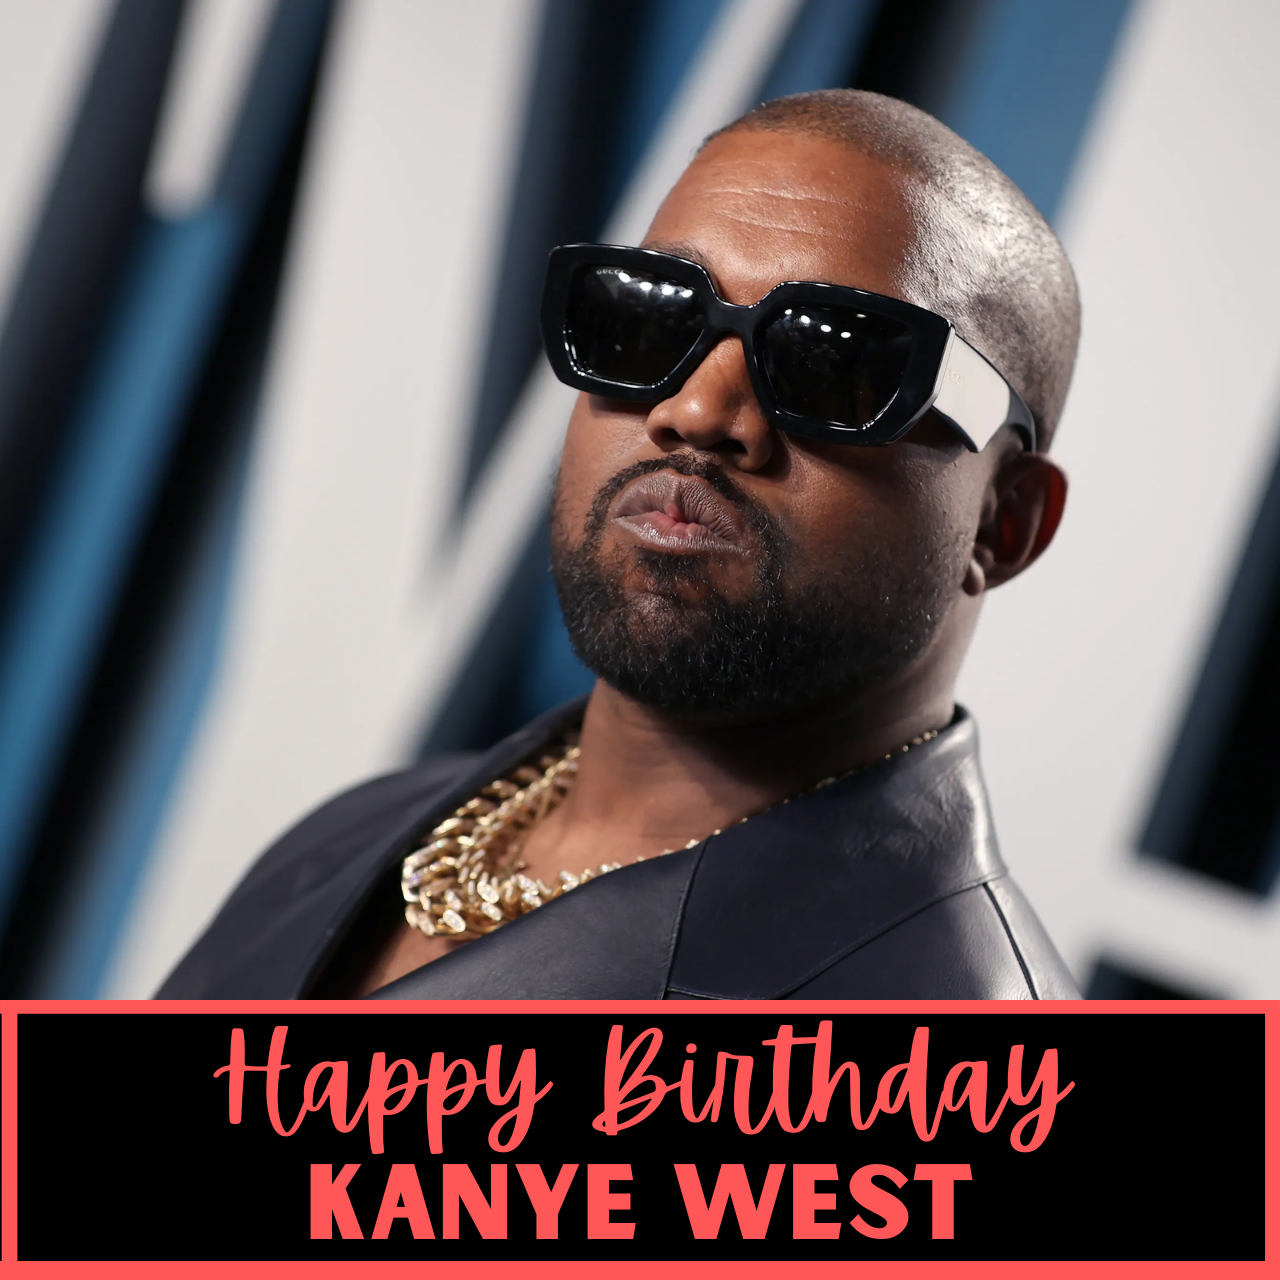 Happy Birthday Kanye West: Quotes, Memes, Images, Posters, Greetings, to greet 'Koeman'